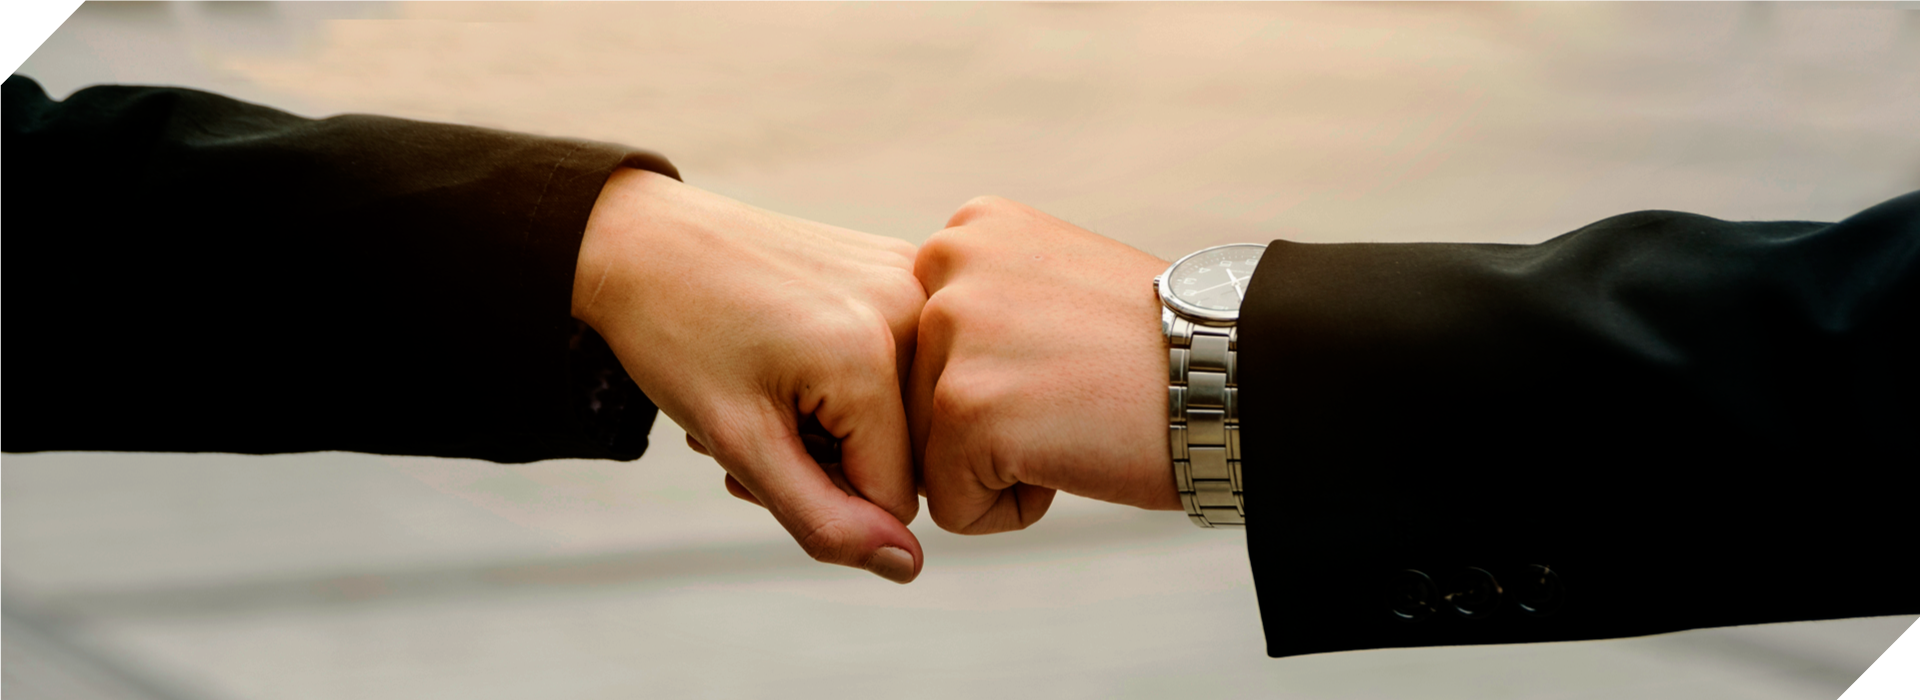 Financial advisor Vikram Kaul & his client bumped hands together after connecting for a financial planning meeting.